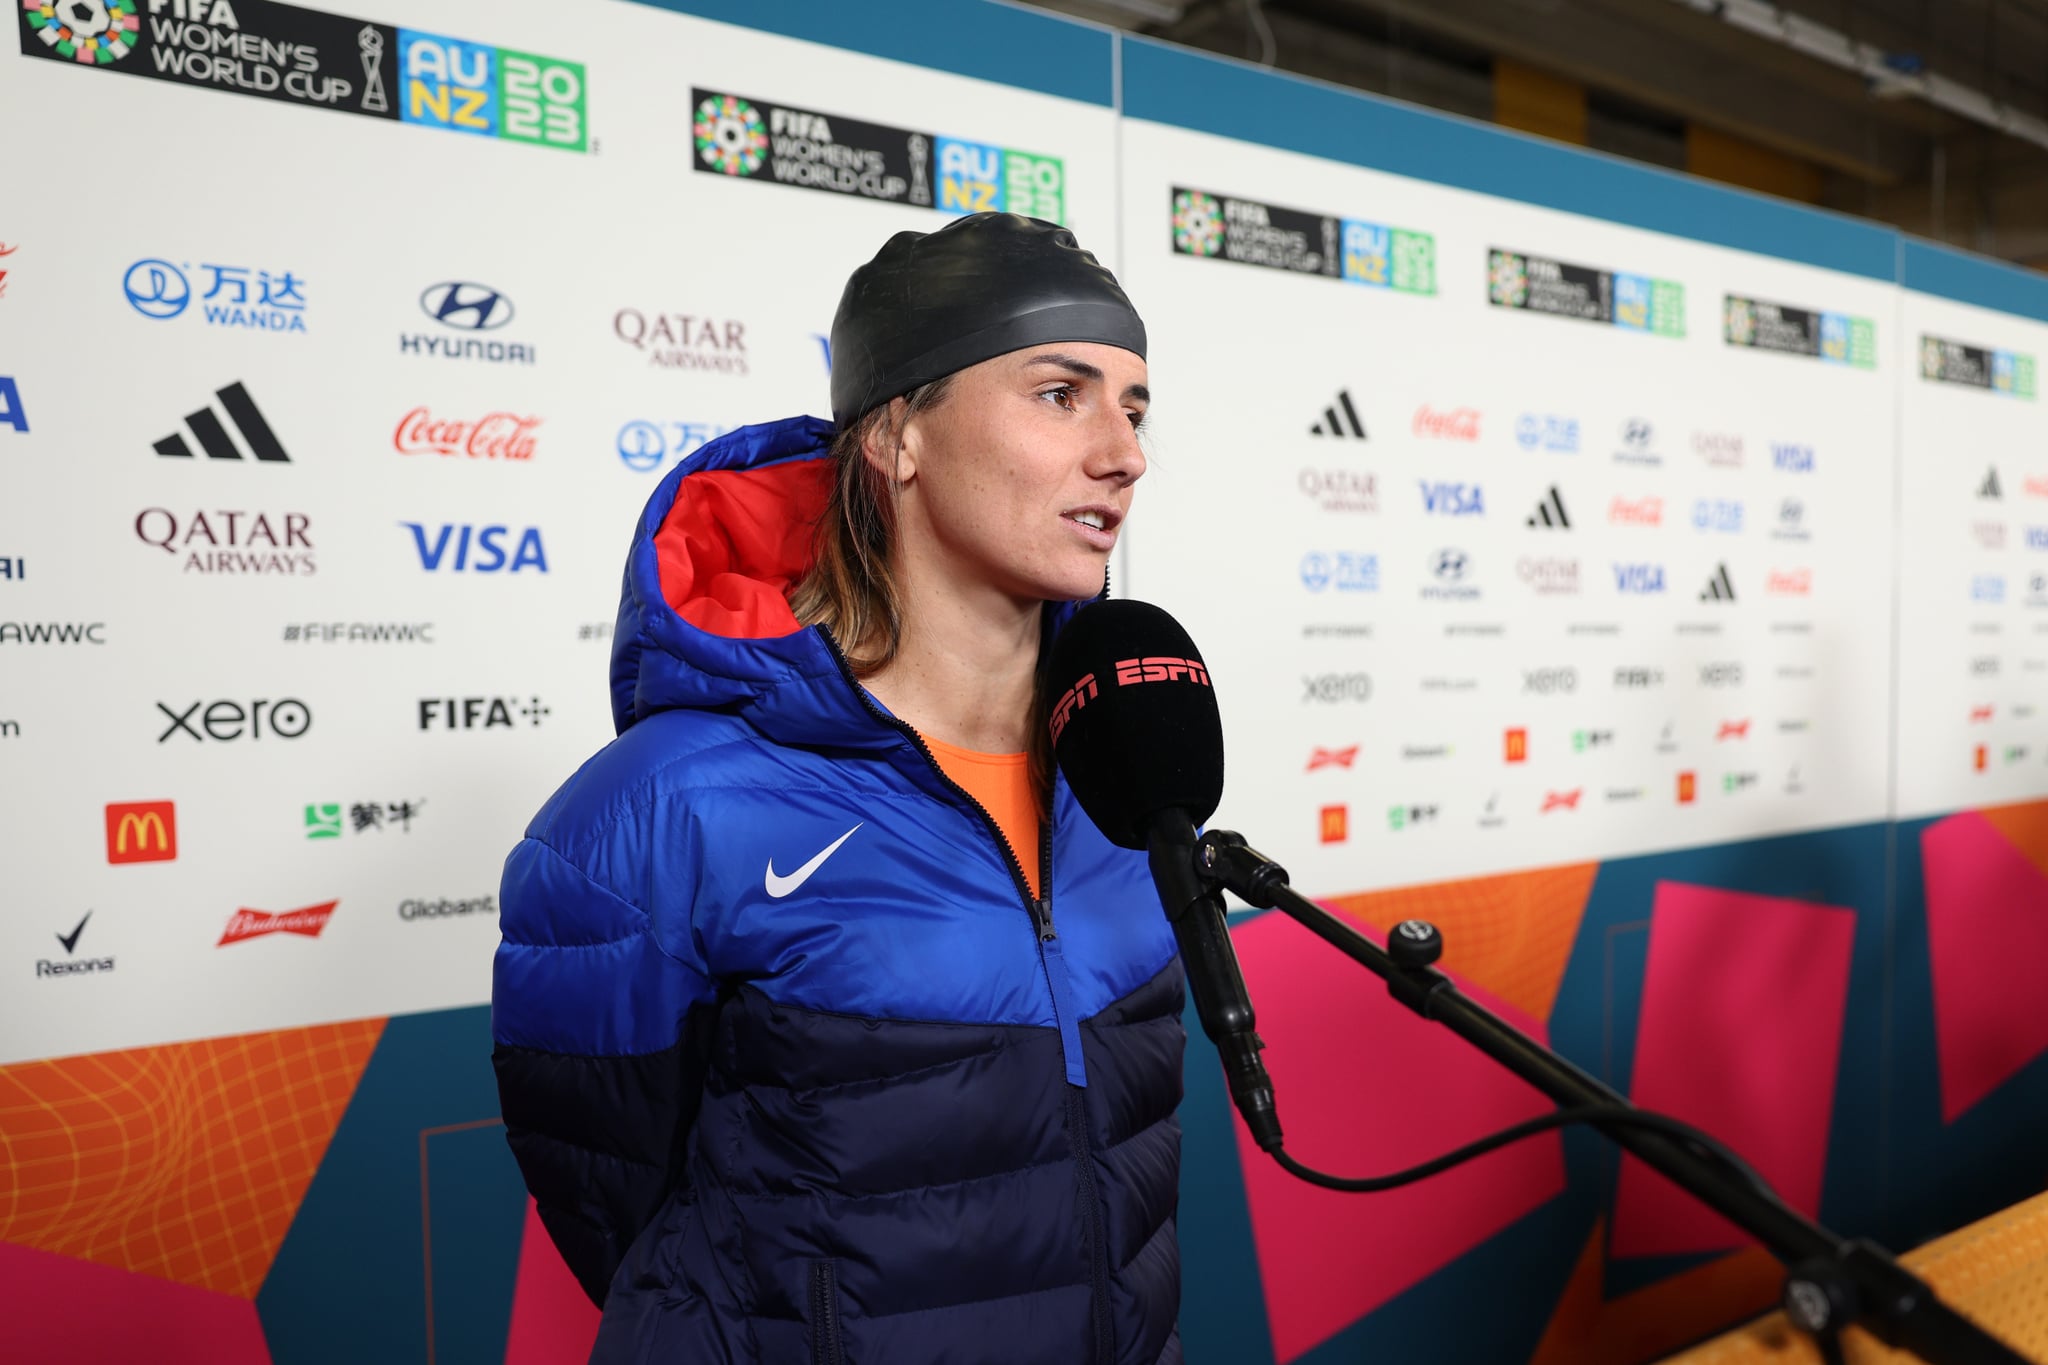 WELLINGTON, NEW ZEALAND - JULY 27: Danielle Van De Donk of Netherlands is interviewed in the mixed zone after the 1-1 draw in the FIFA Women's World Cup Australia & New Zealand 2023 Group E match between USA and Netherlands at Wellington Regional Stadium on July 27, 2023 in Wellington / Te Whanganui-a-Tara, New Zealand. (Photo by Hagen Hopkins - FIFA/FIFA via Getty Images)